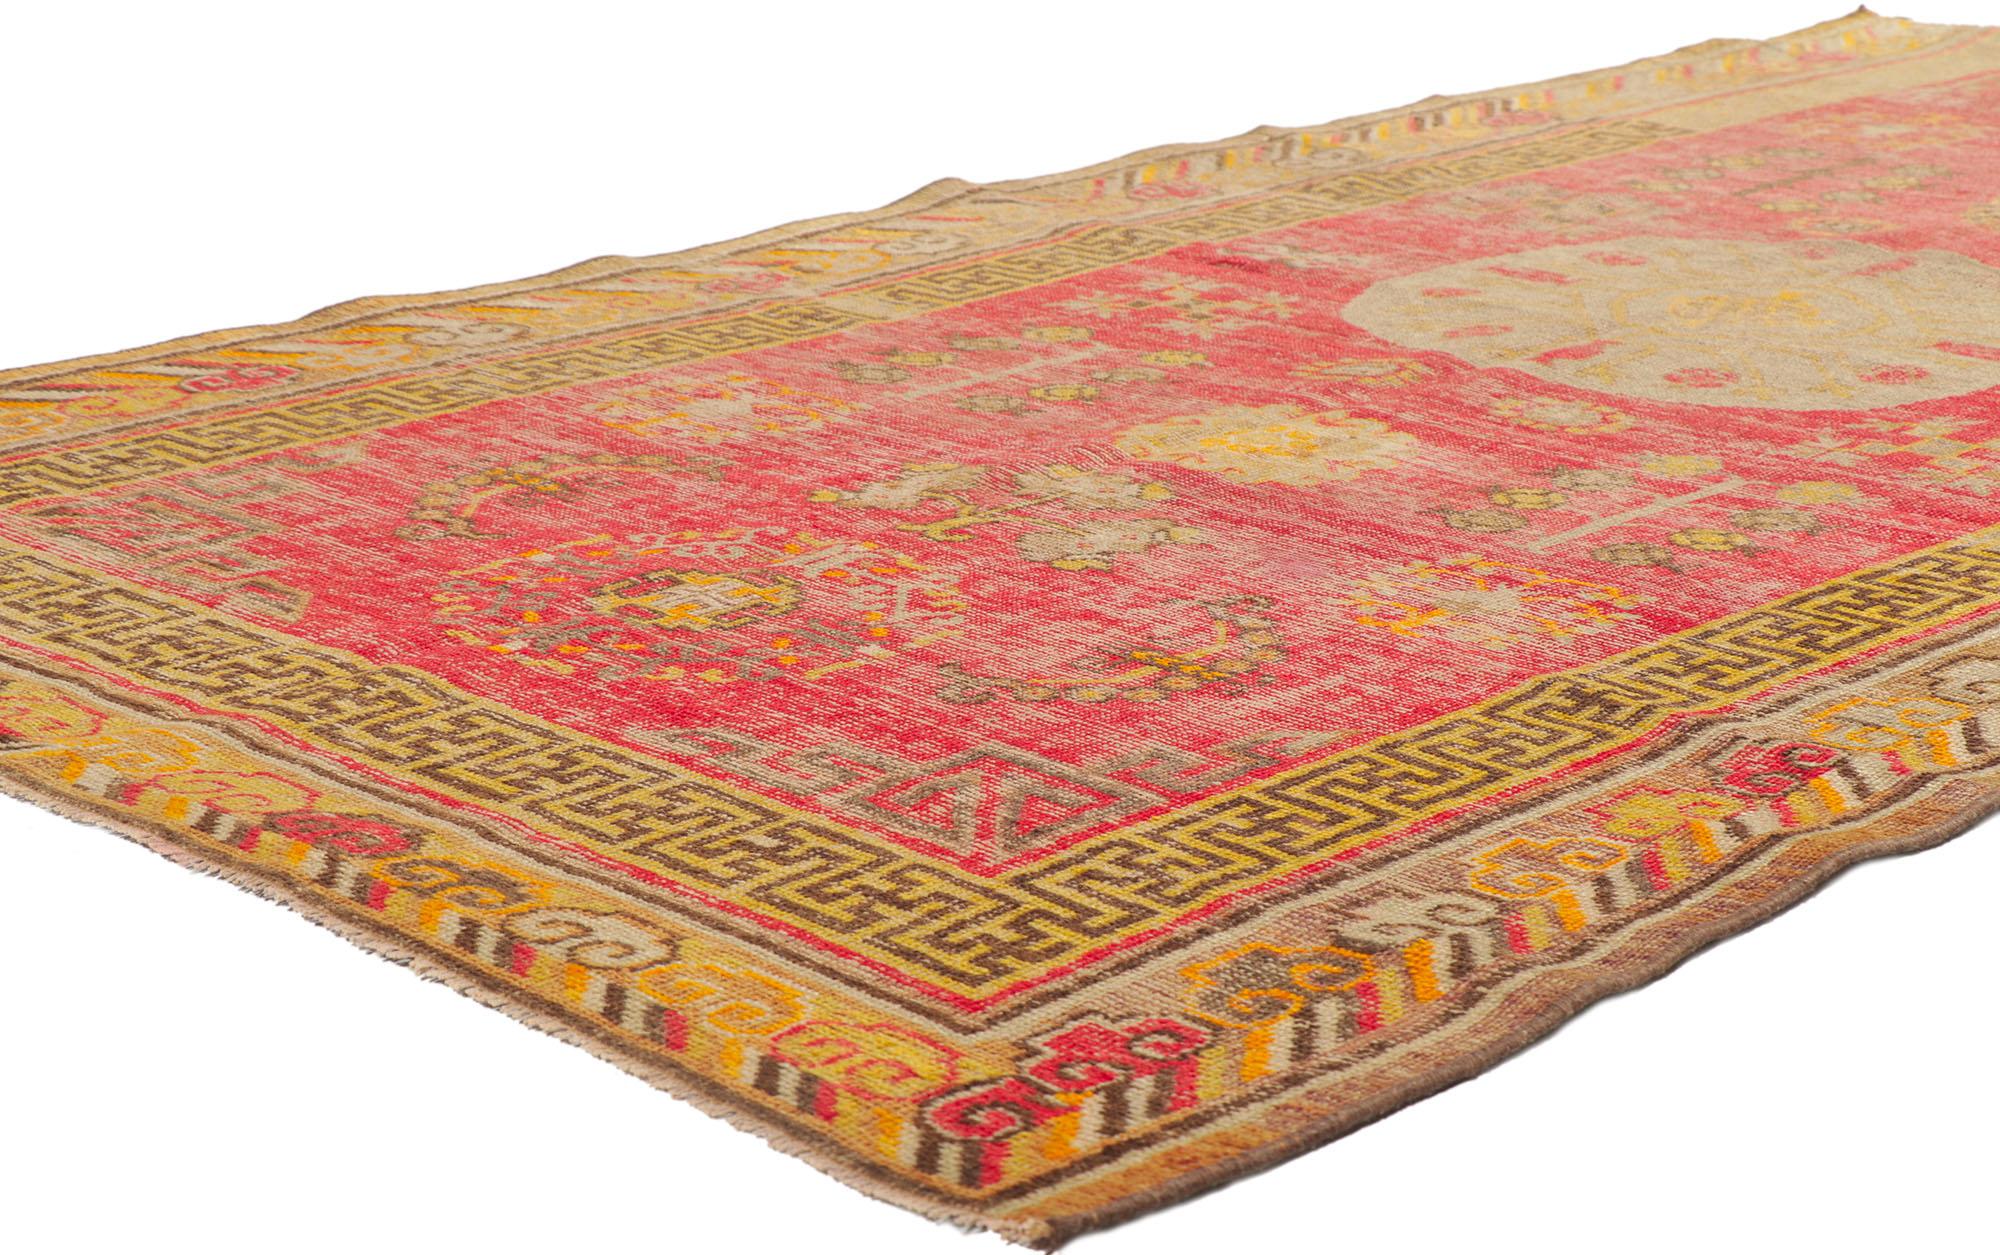 53710 Distressed Vintage Turkish Oushak Rug, 04'08 x 08'06.
​Weathered finesse meets East Turkestan charm in this distressed vintage Turkish Oushak rug. The traditional Khotan design elements and bold colorway woven into this piece work together